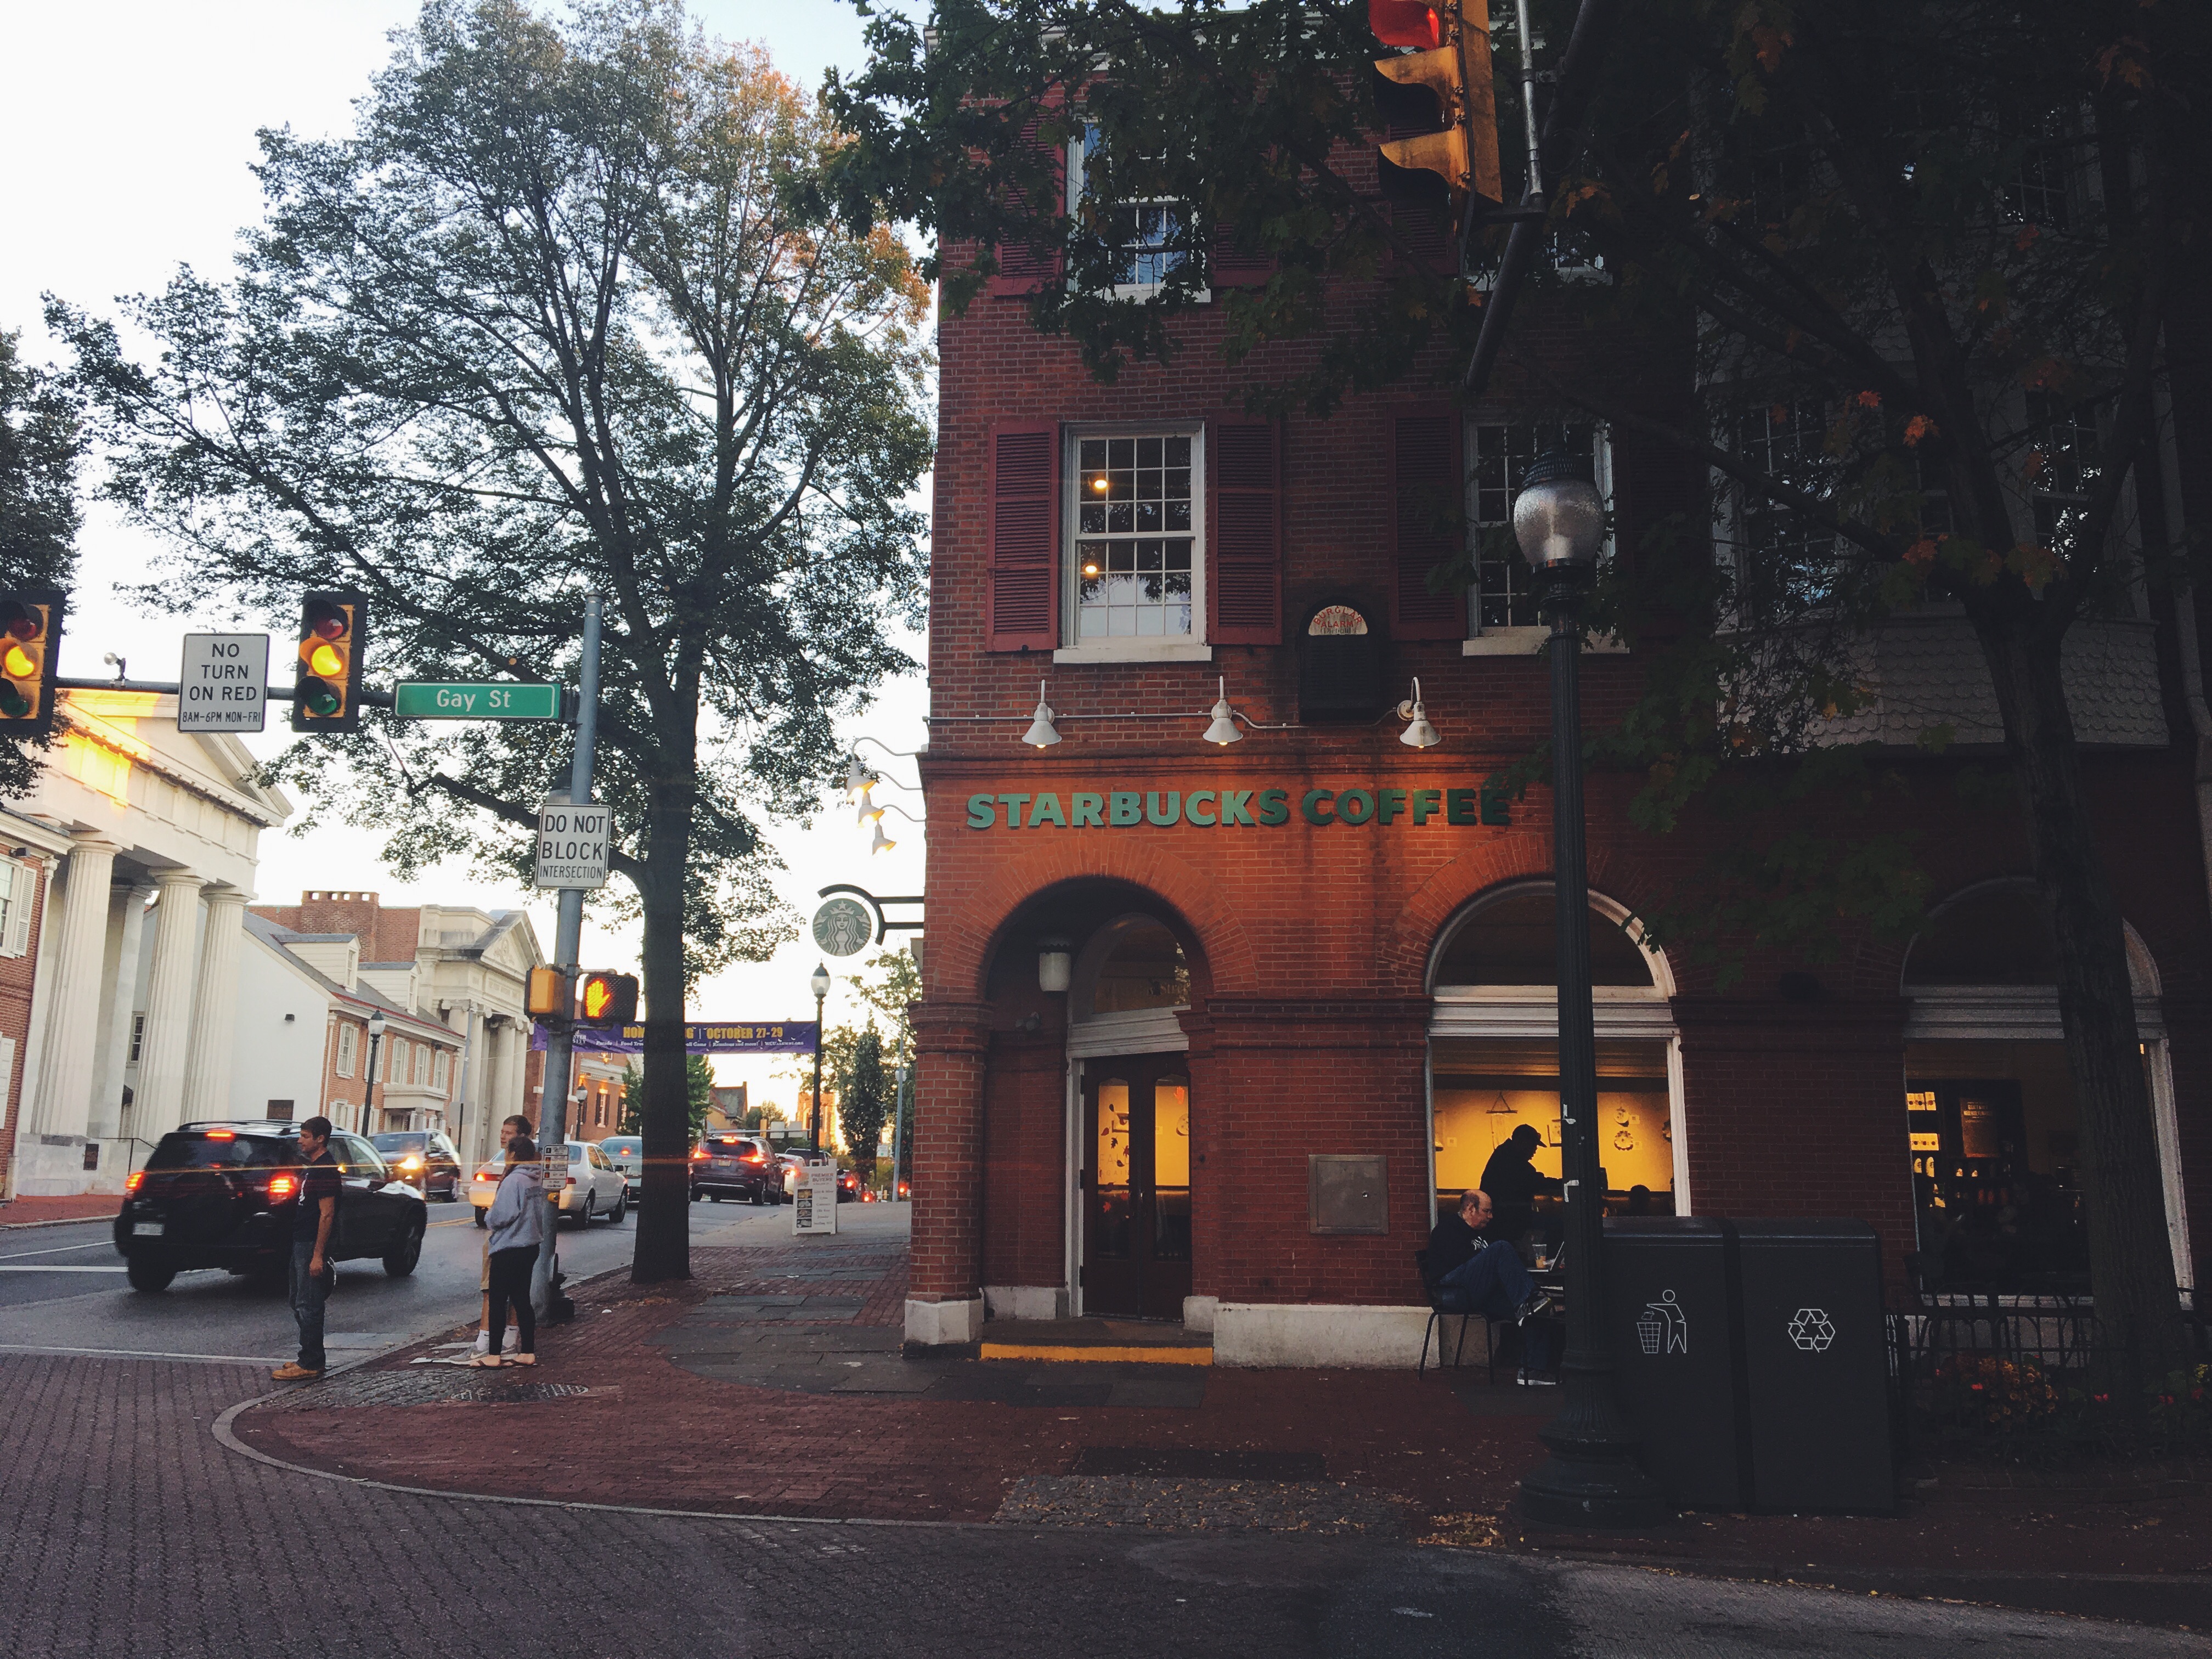 West Chester study spots: Starbucks located on the corner of Gay and High Streets